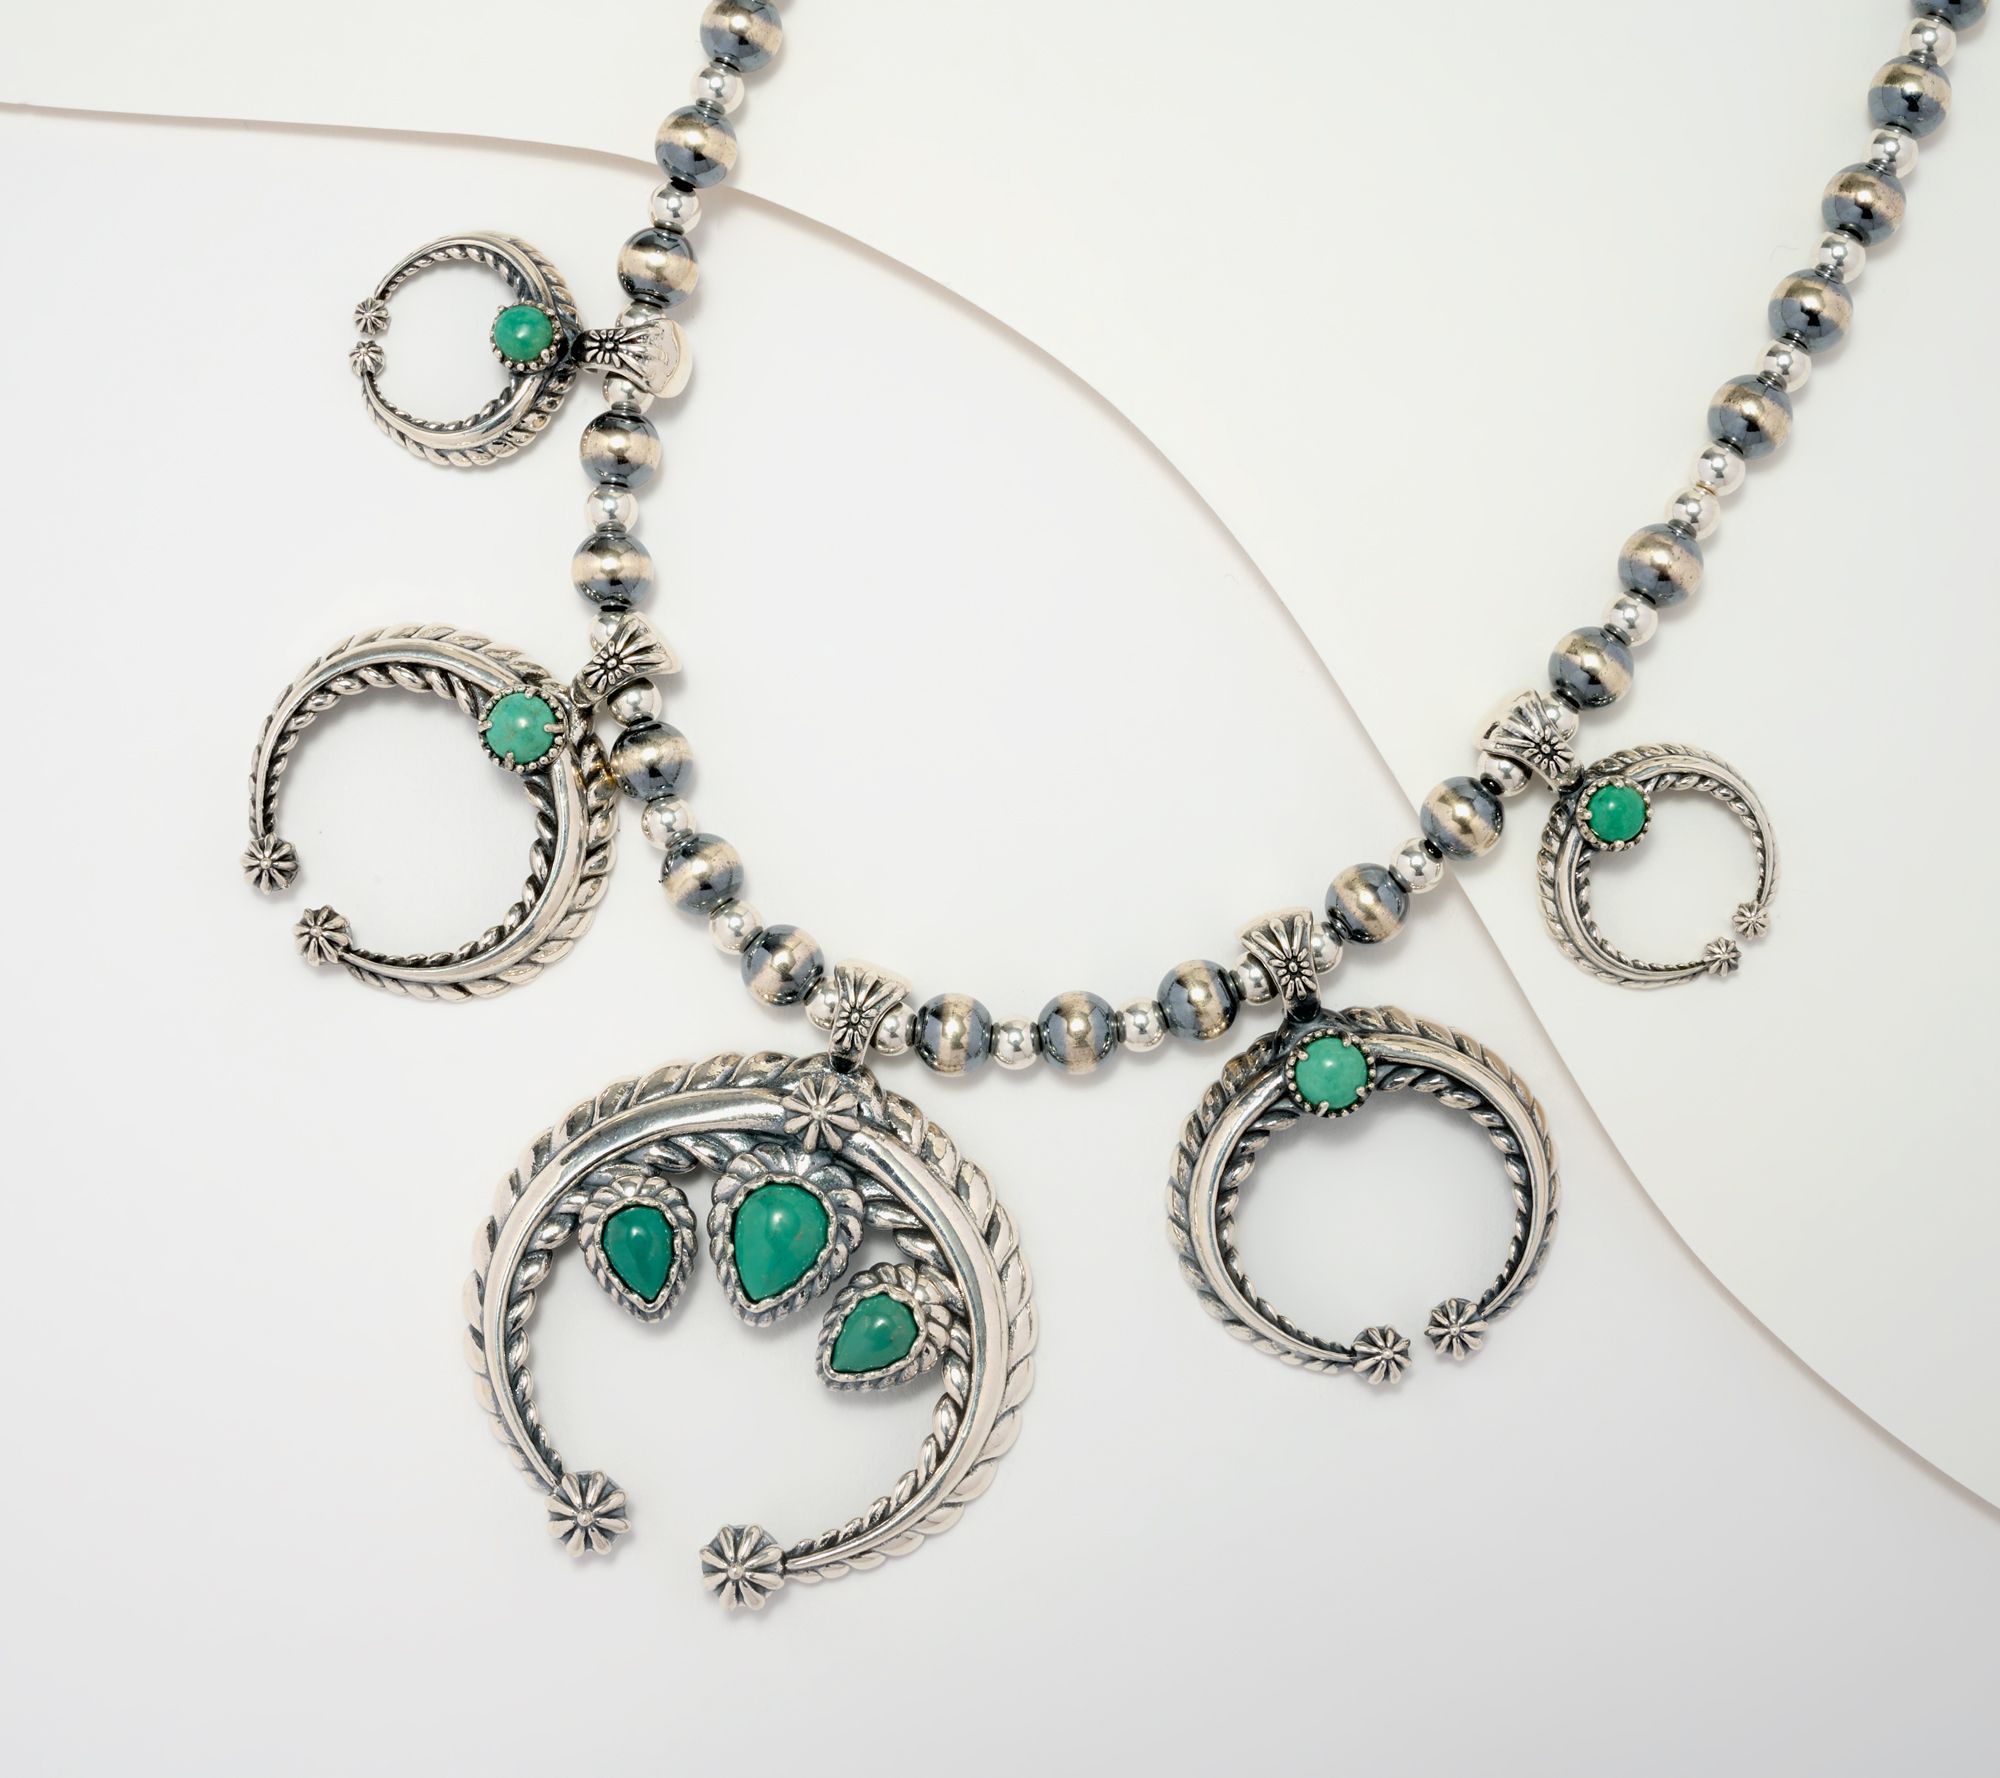 American West Sterling Silver Turquoise Naja Bead Necklace - QVC.com